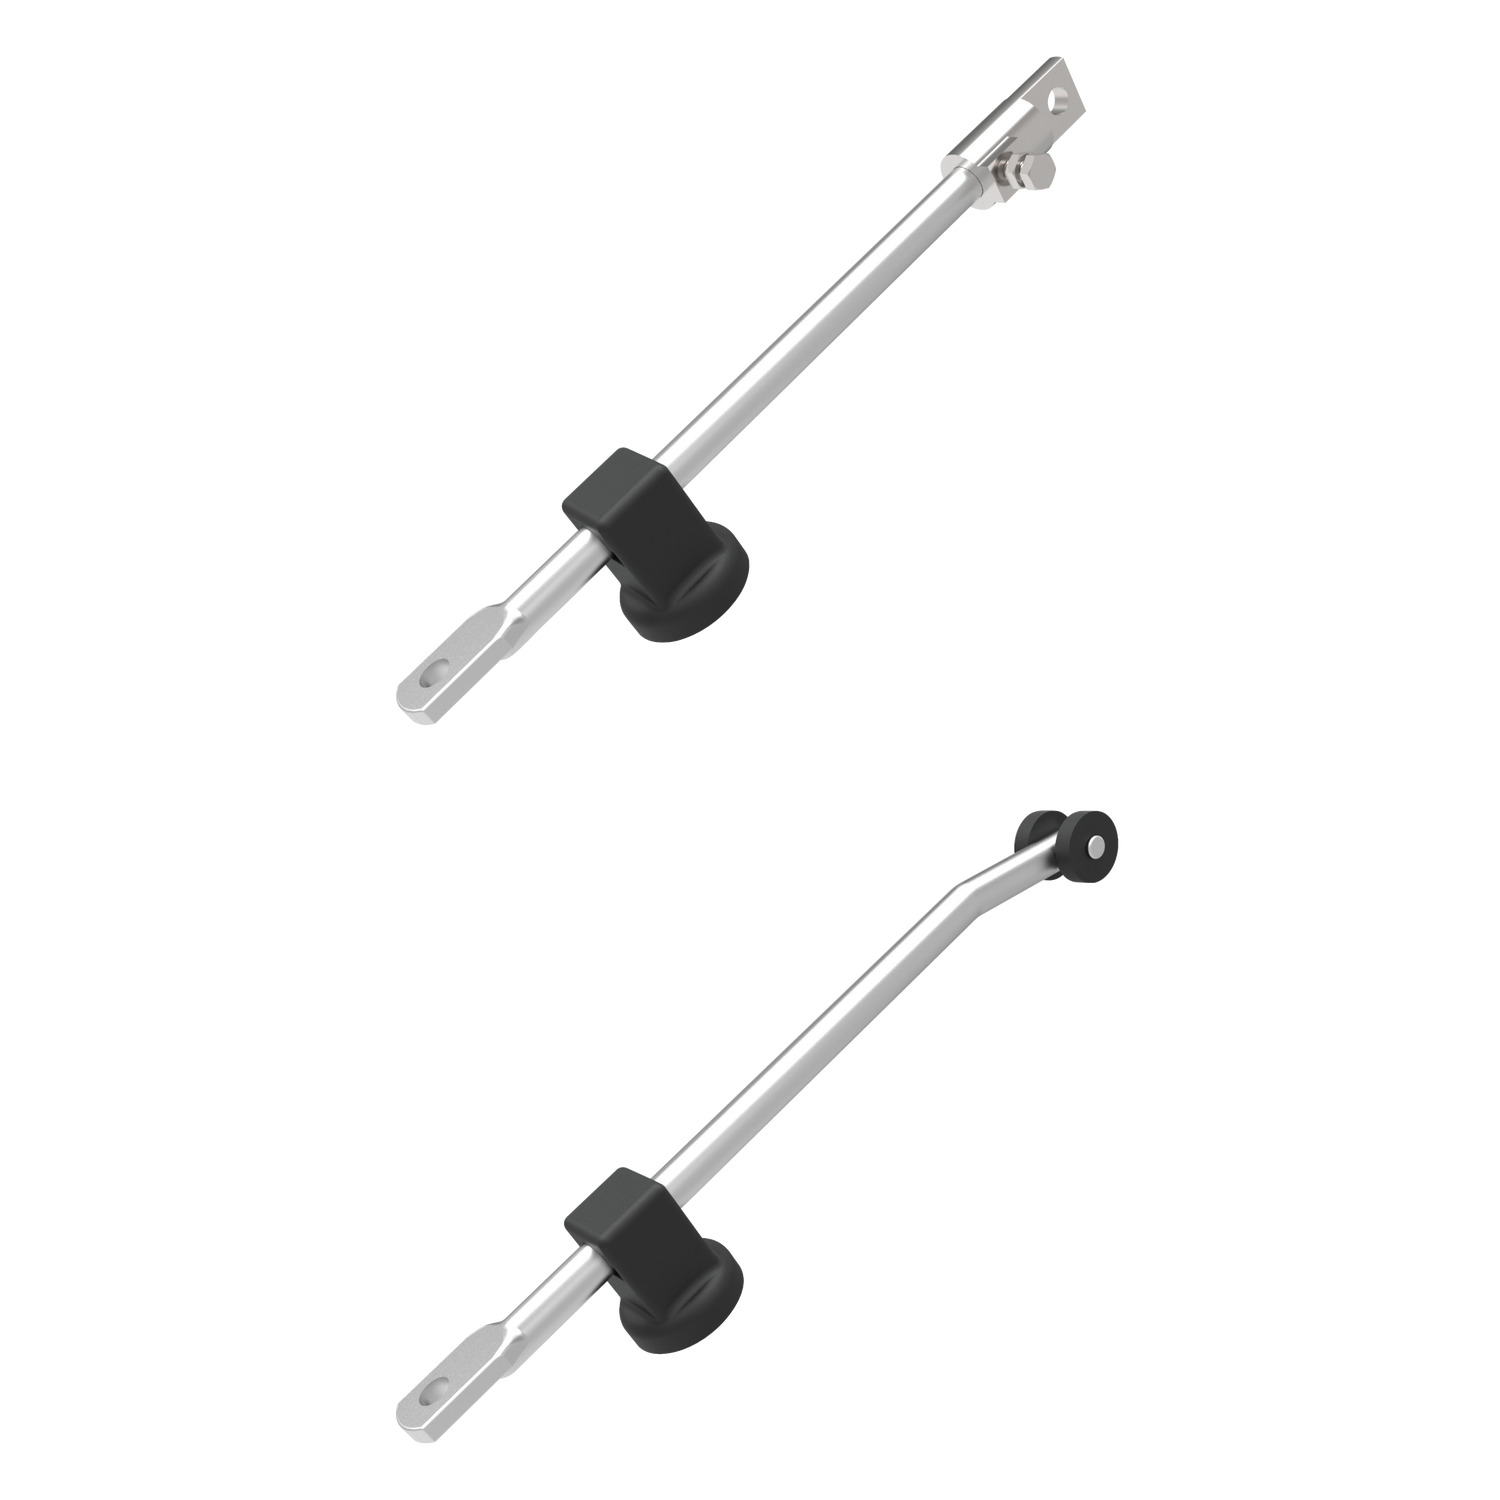 A0303.AW3060 Multi-Point Latching round rod - Steel, Zinc Plated - L=600mm